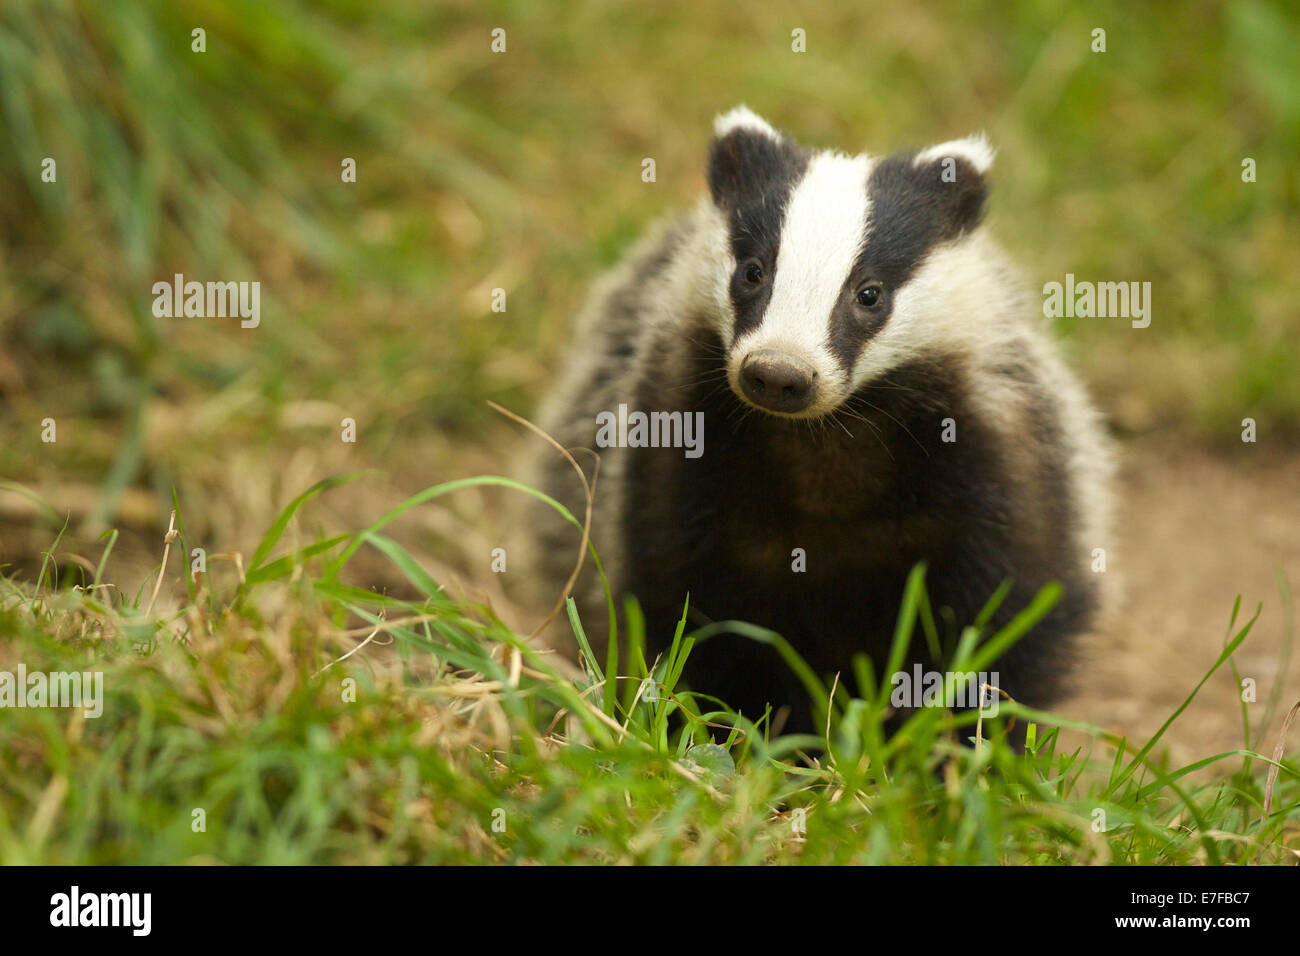 Badger poses for the camera #2284 Stock Photo